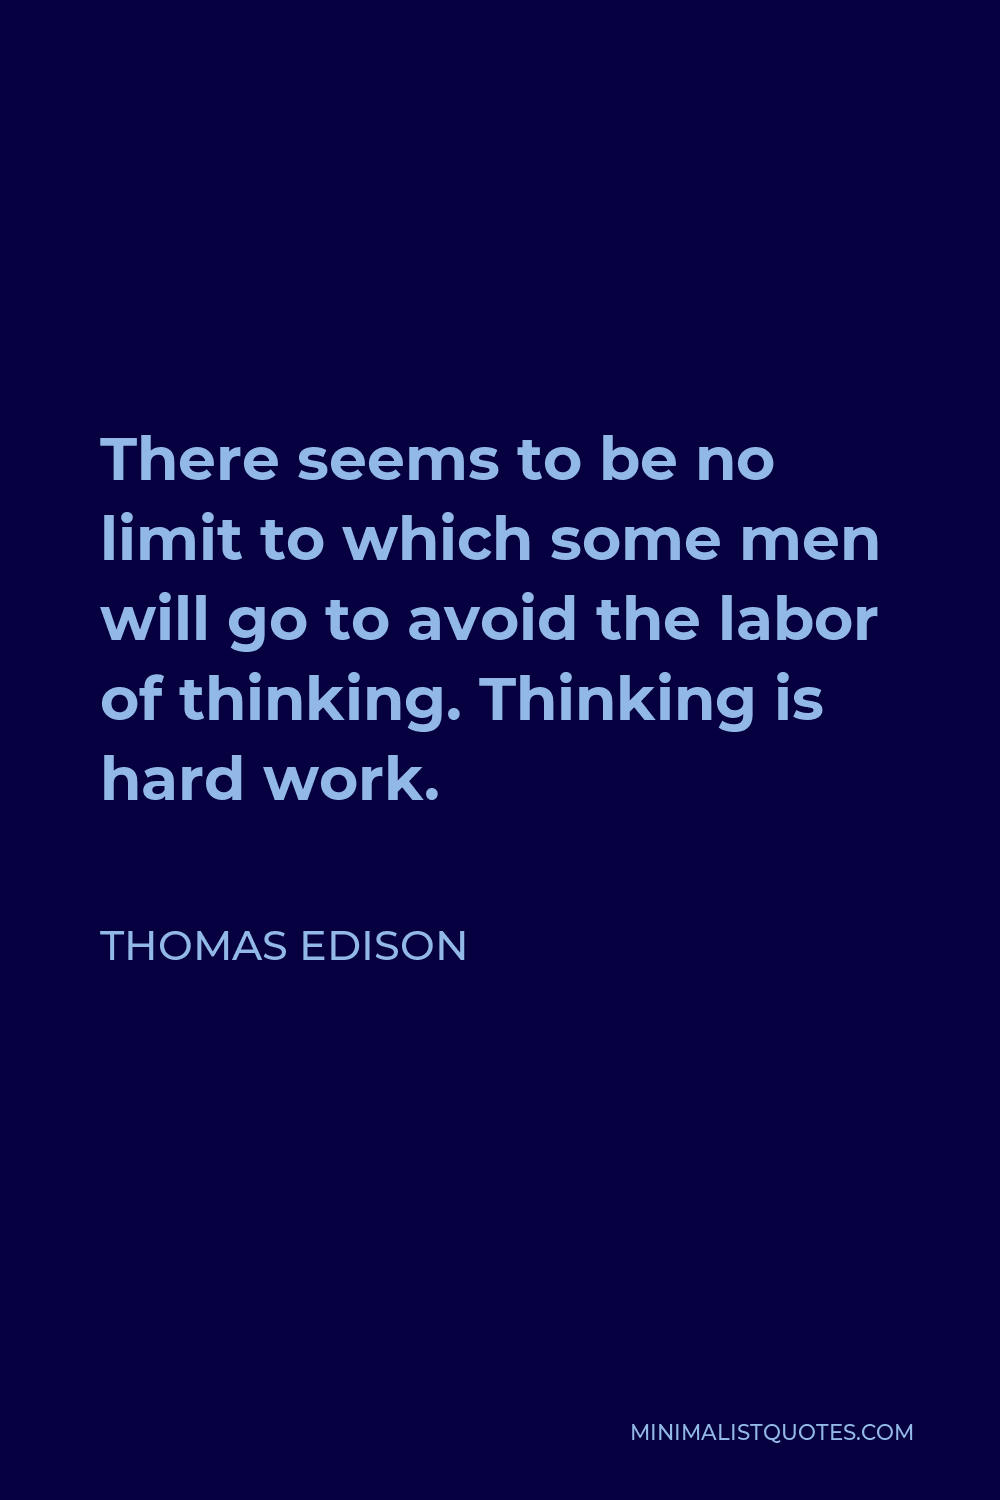 Thomas Edison Quote - There seems to be no limit to which some men will go to avoid the labor of thinking. Thinking is hard work.